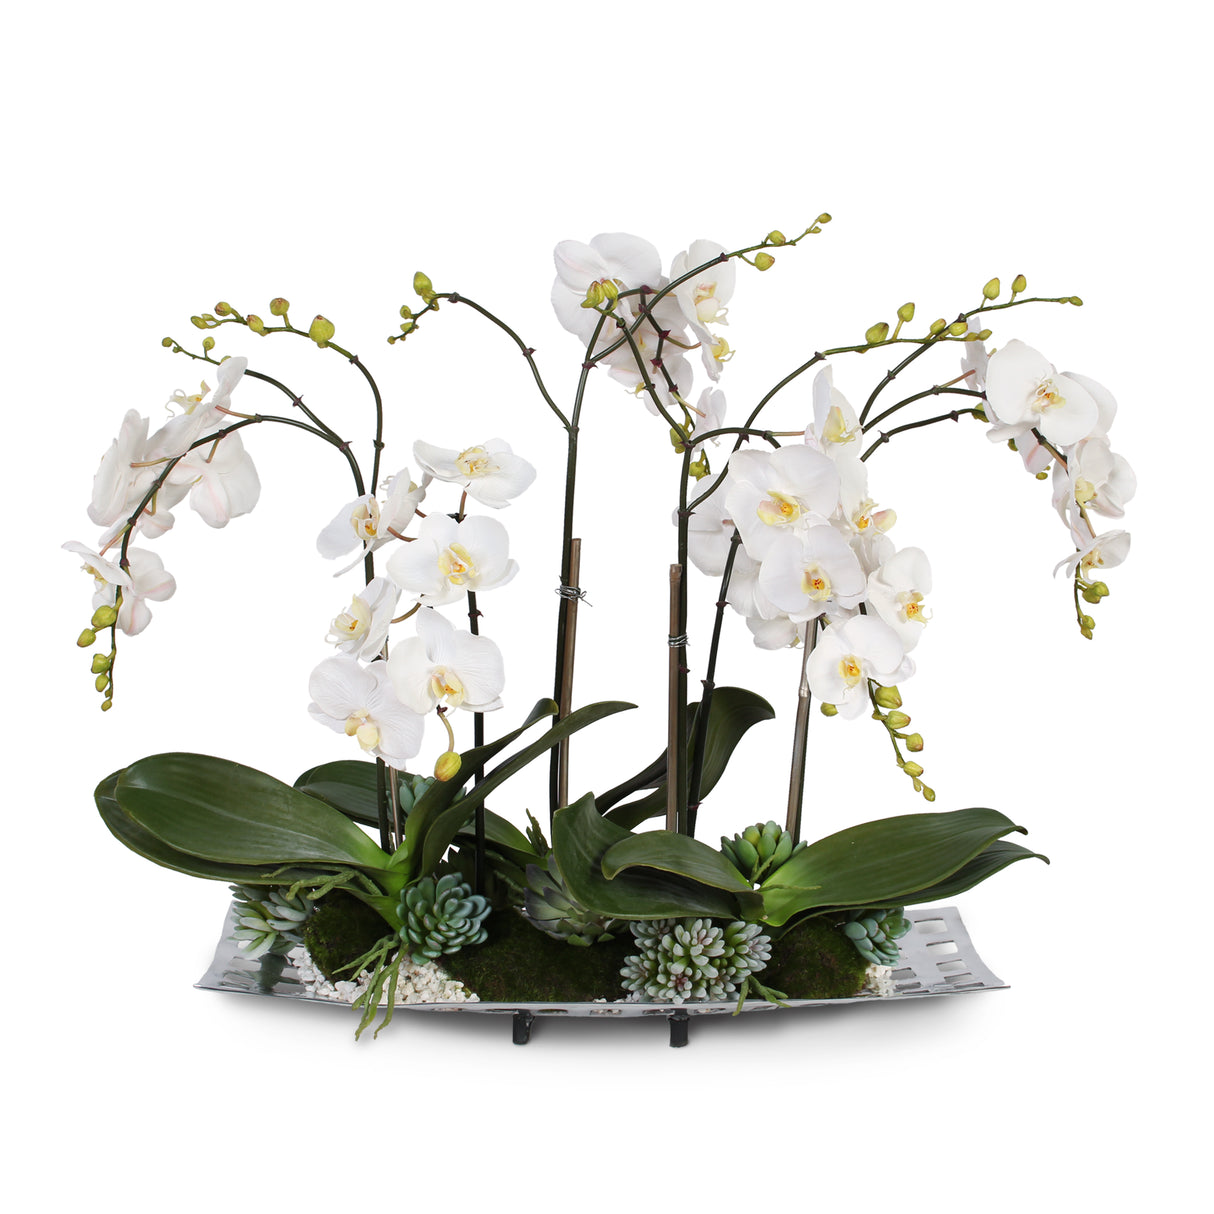 Jenny Silks Real Touch White Phalaenopsis Orchids with Succulents and White Pebbles in Aluminum Tray #F-55